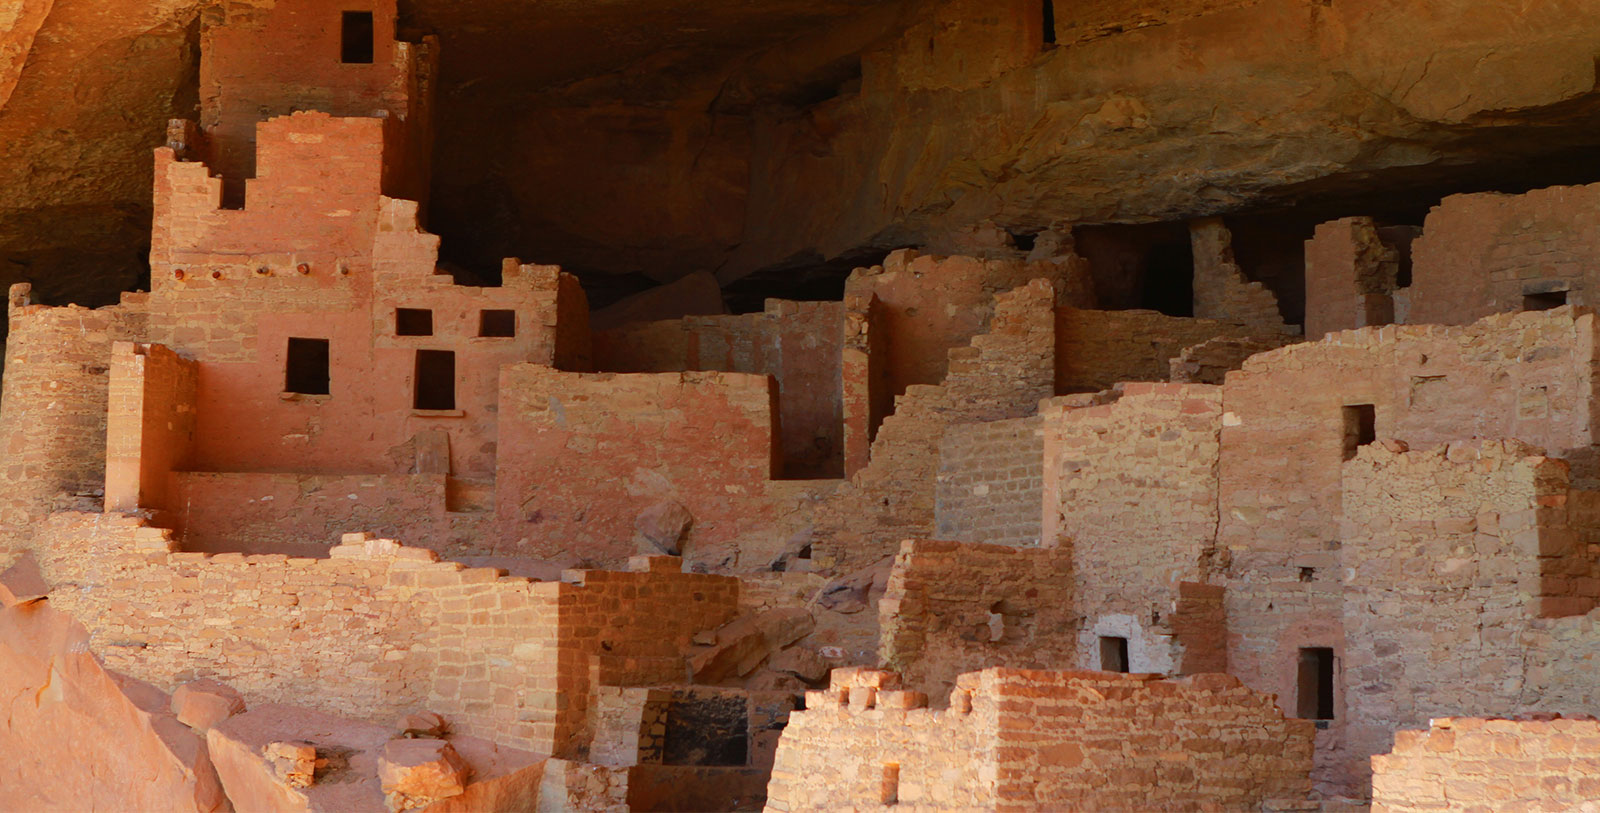 Experience walking through the cliff dwellings at Mesa Verde National Park, some of the best-preserved archaeological treasures in North America.